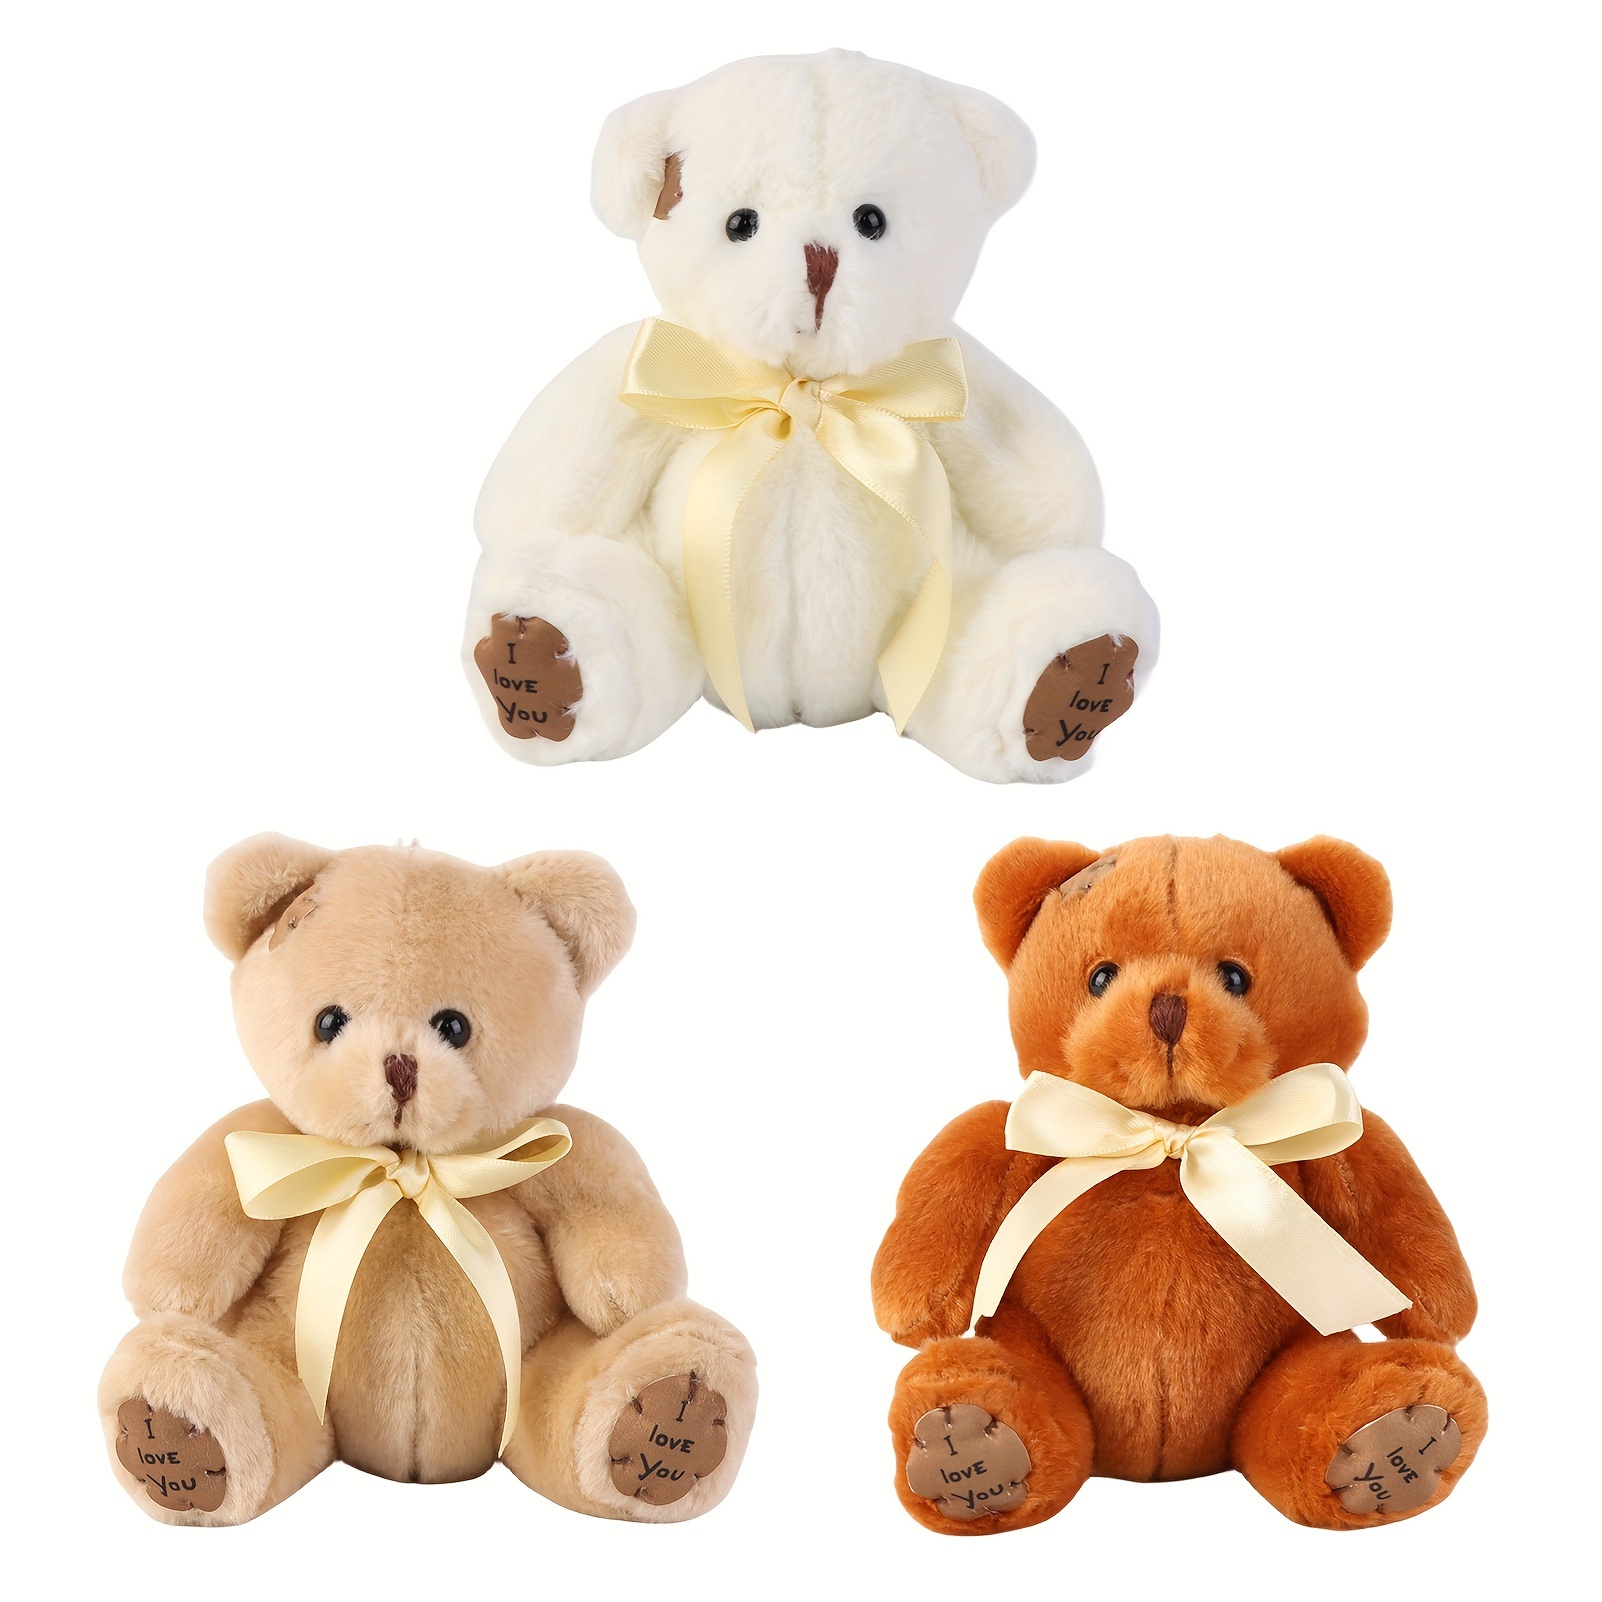 Ours Jouet Simulation Ours Jouet Ours Brun Peluche Animaux Jouets